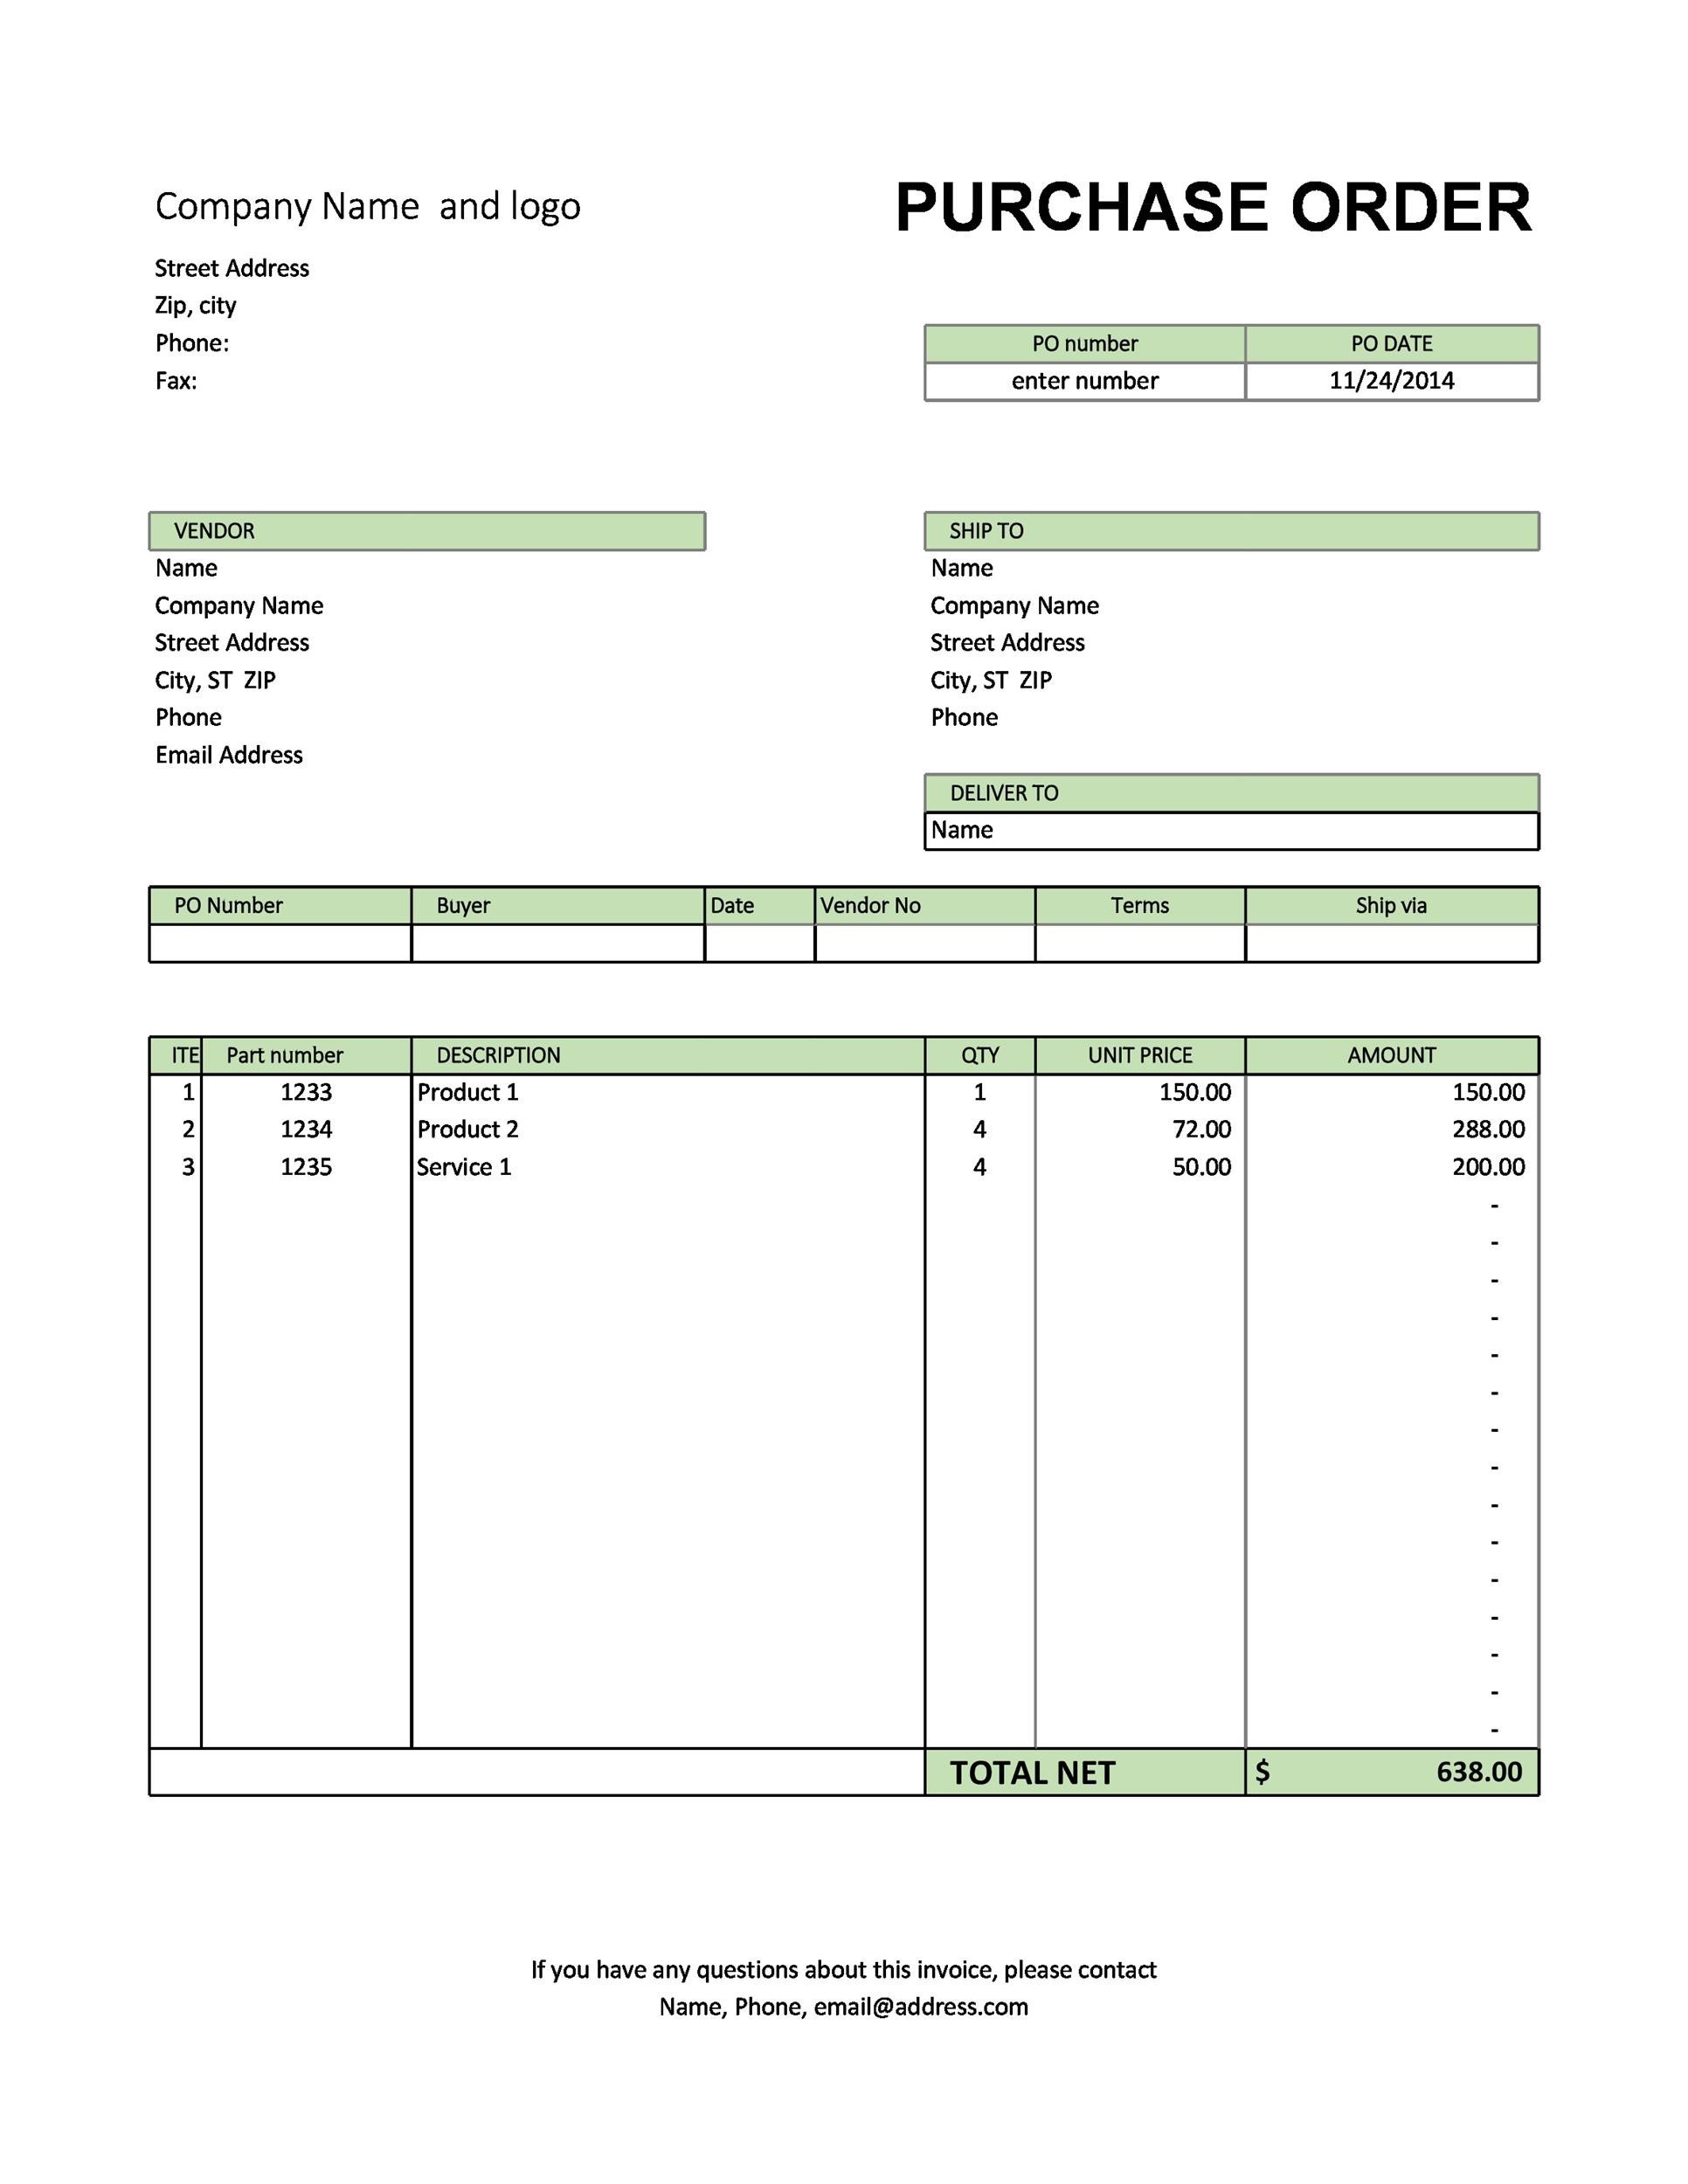 free-purchase-requisition-template-excel-tutore-org-master-of-documents